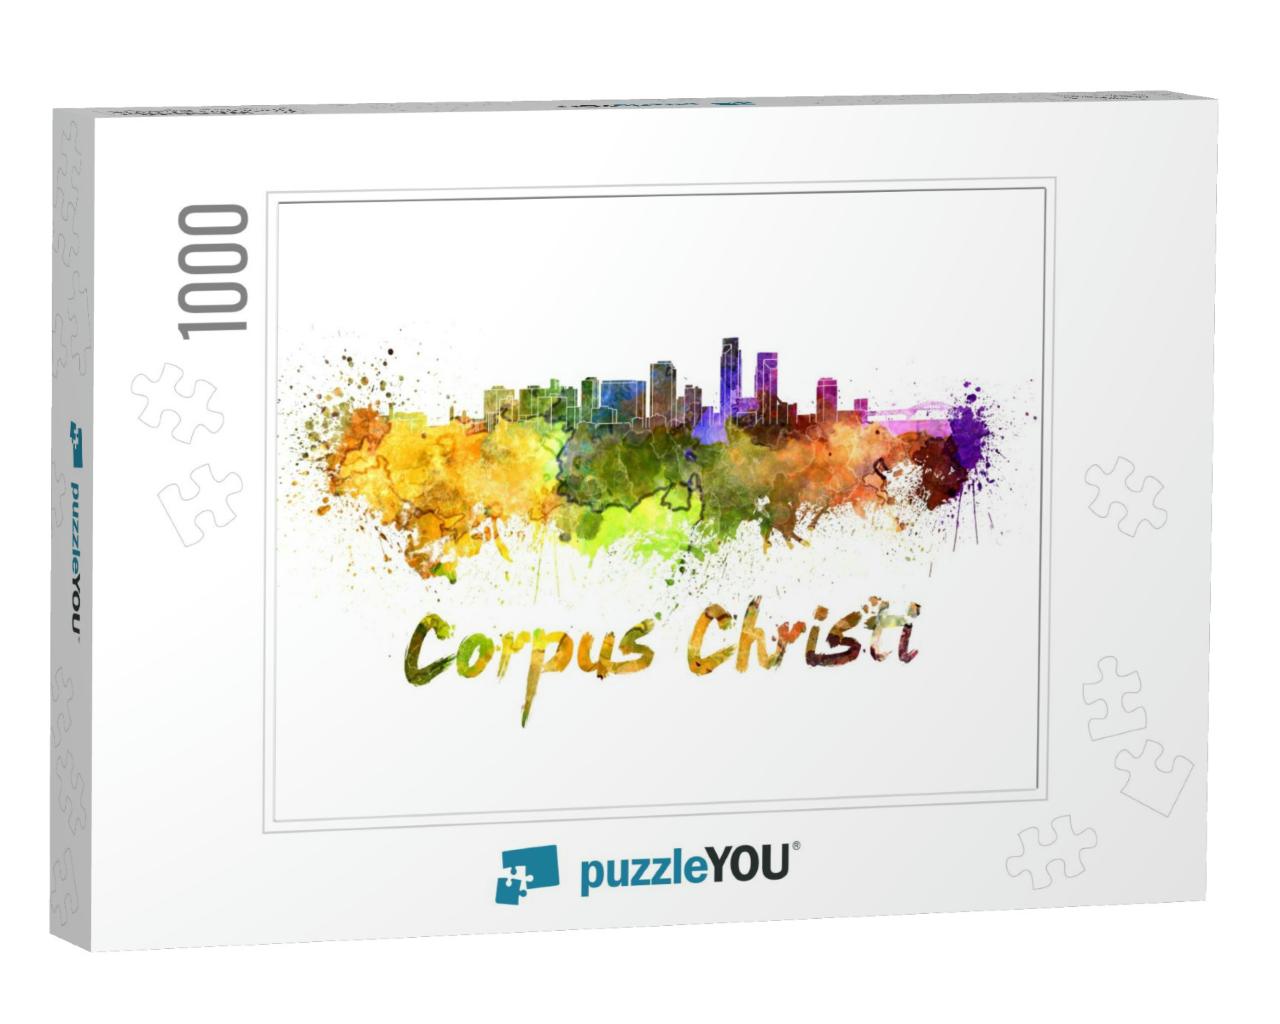 Corpus Christi Skyline in Watercolor Splatters with Clipp... Jigsaw Puzzle with 1000 pieces